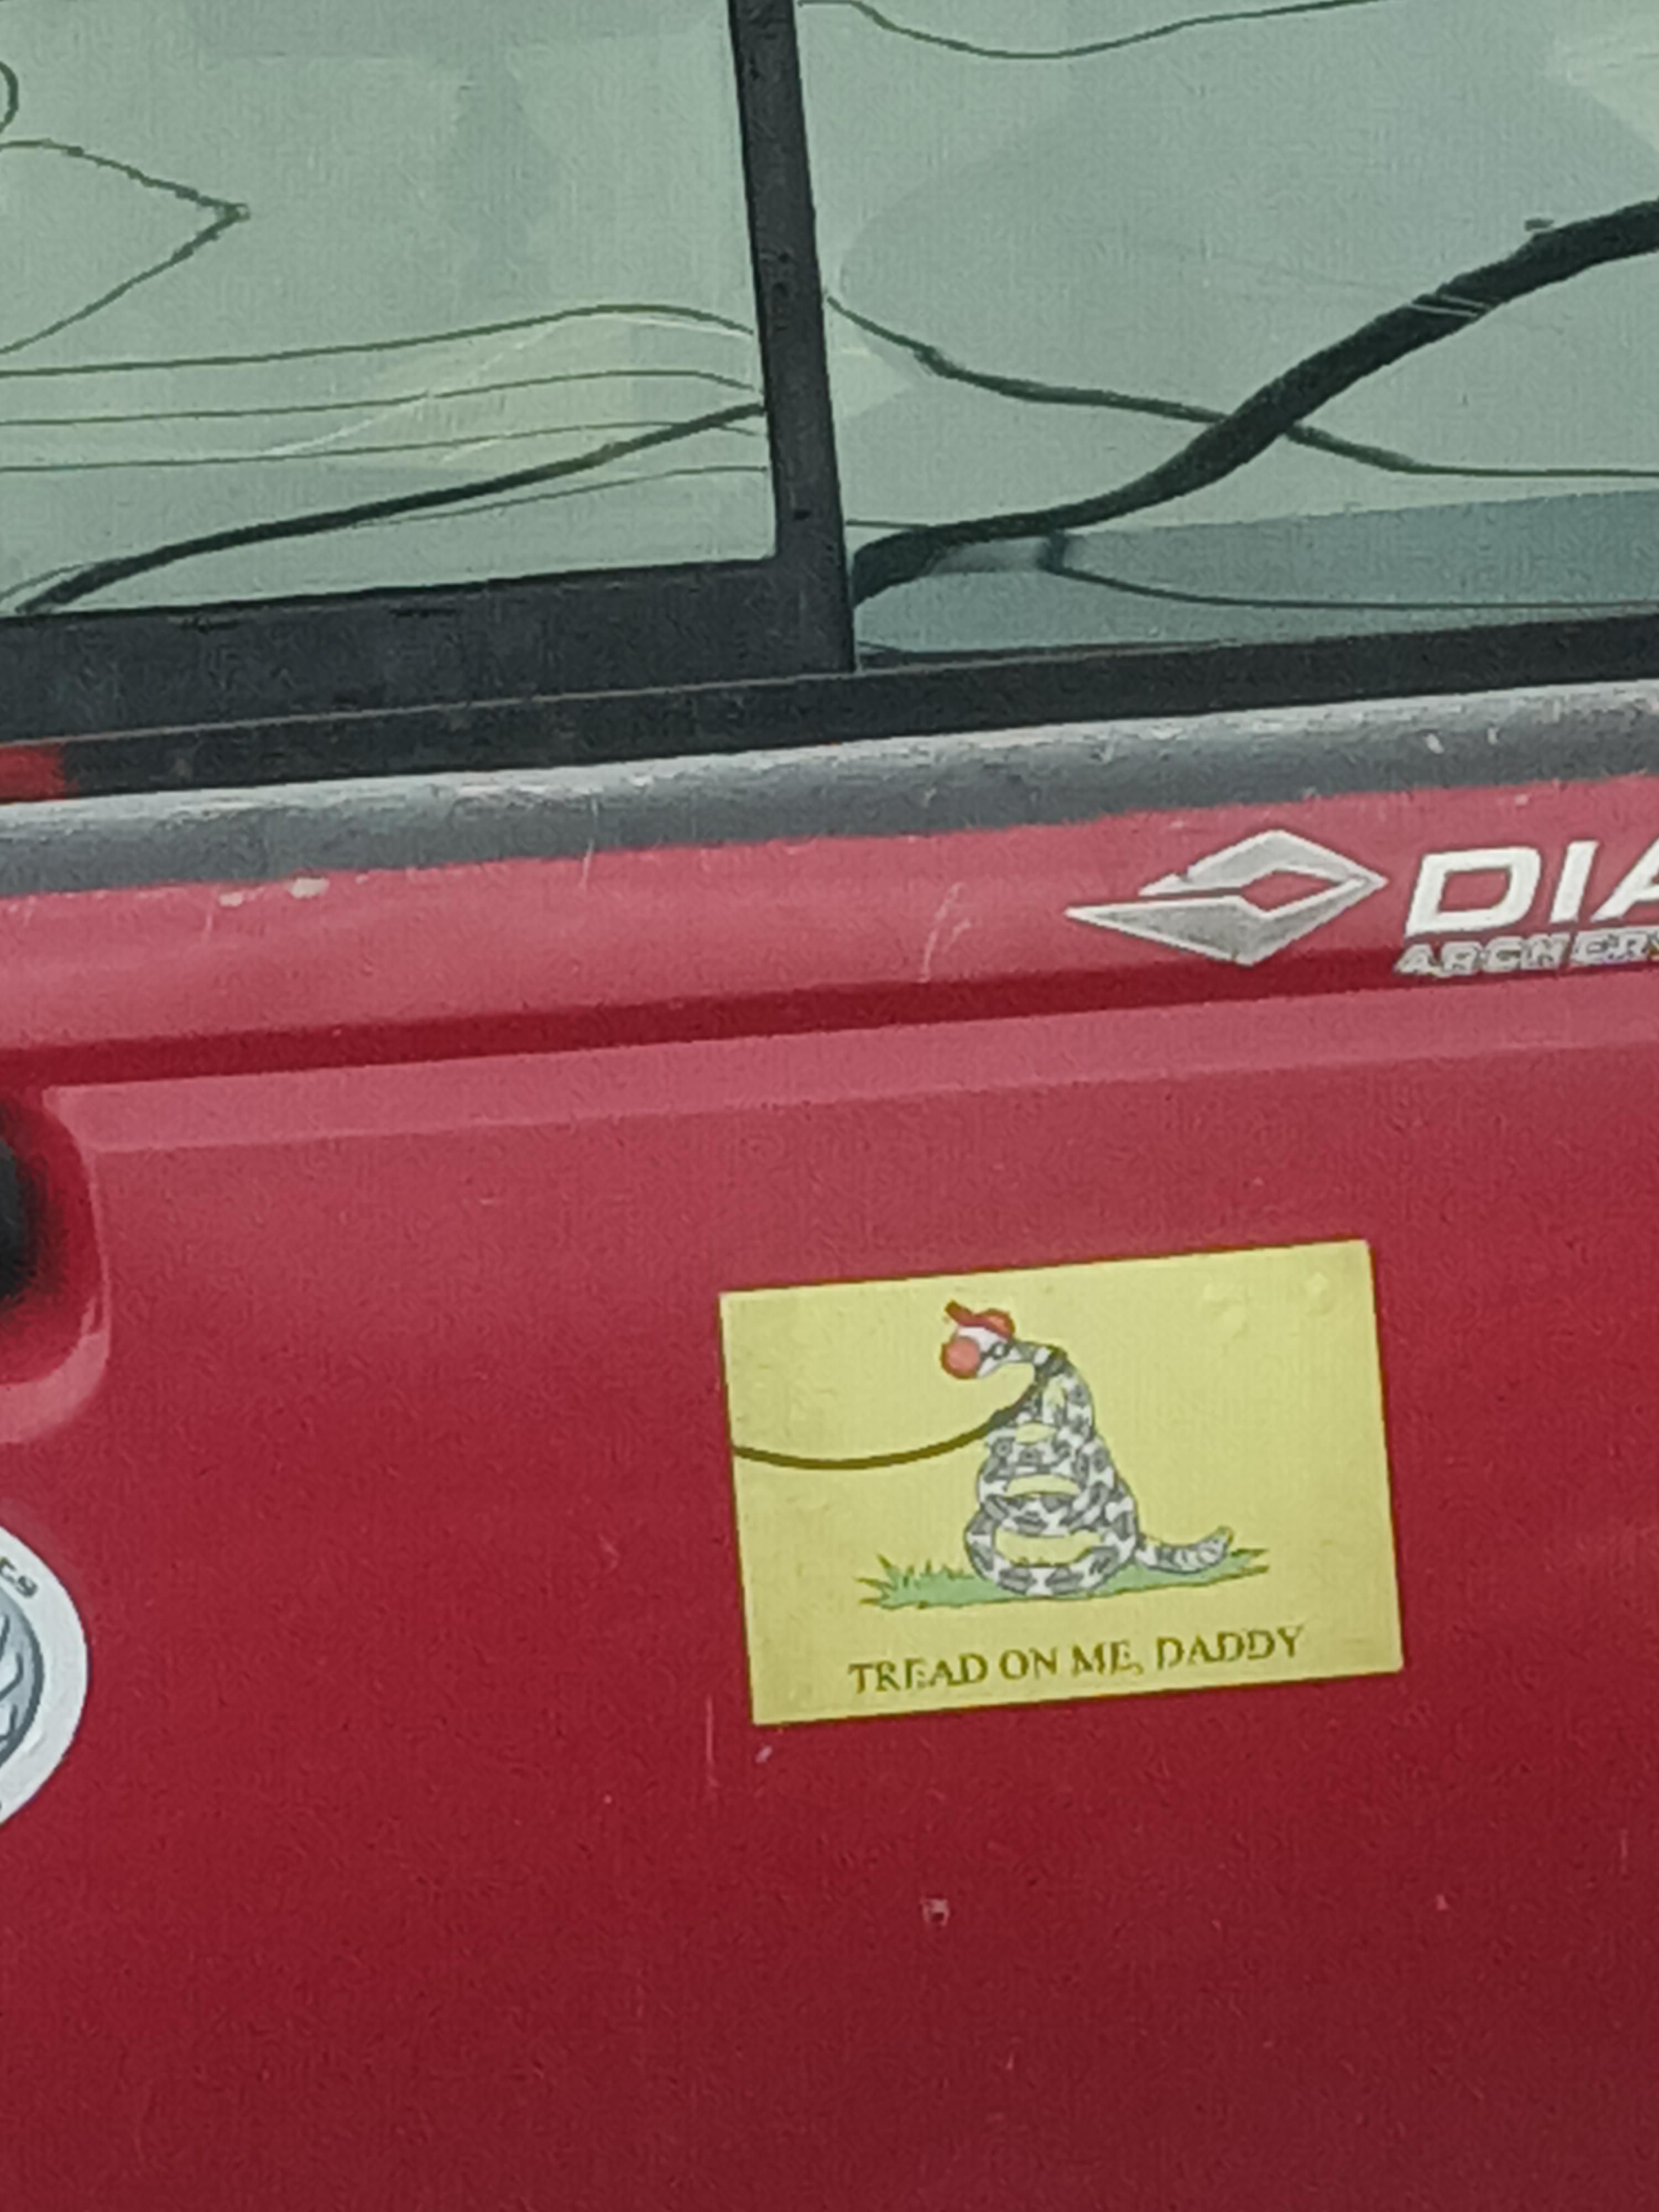 Saw this bad boy on a car in front of me today